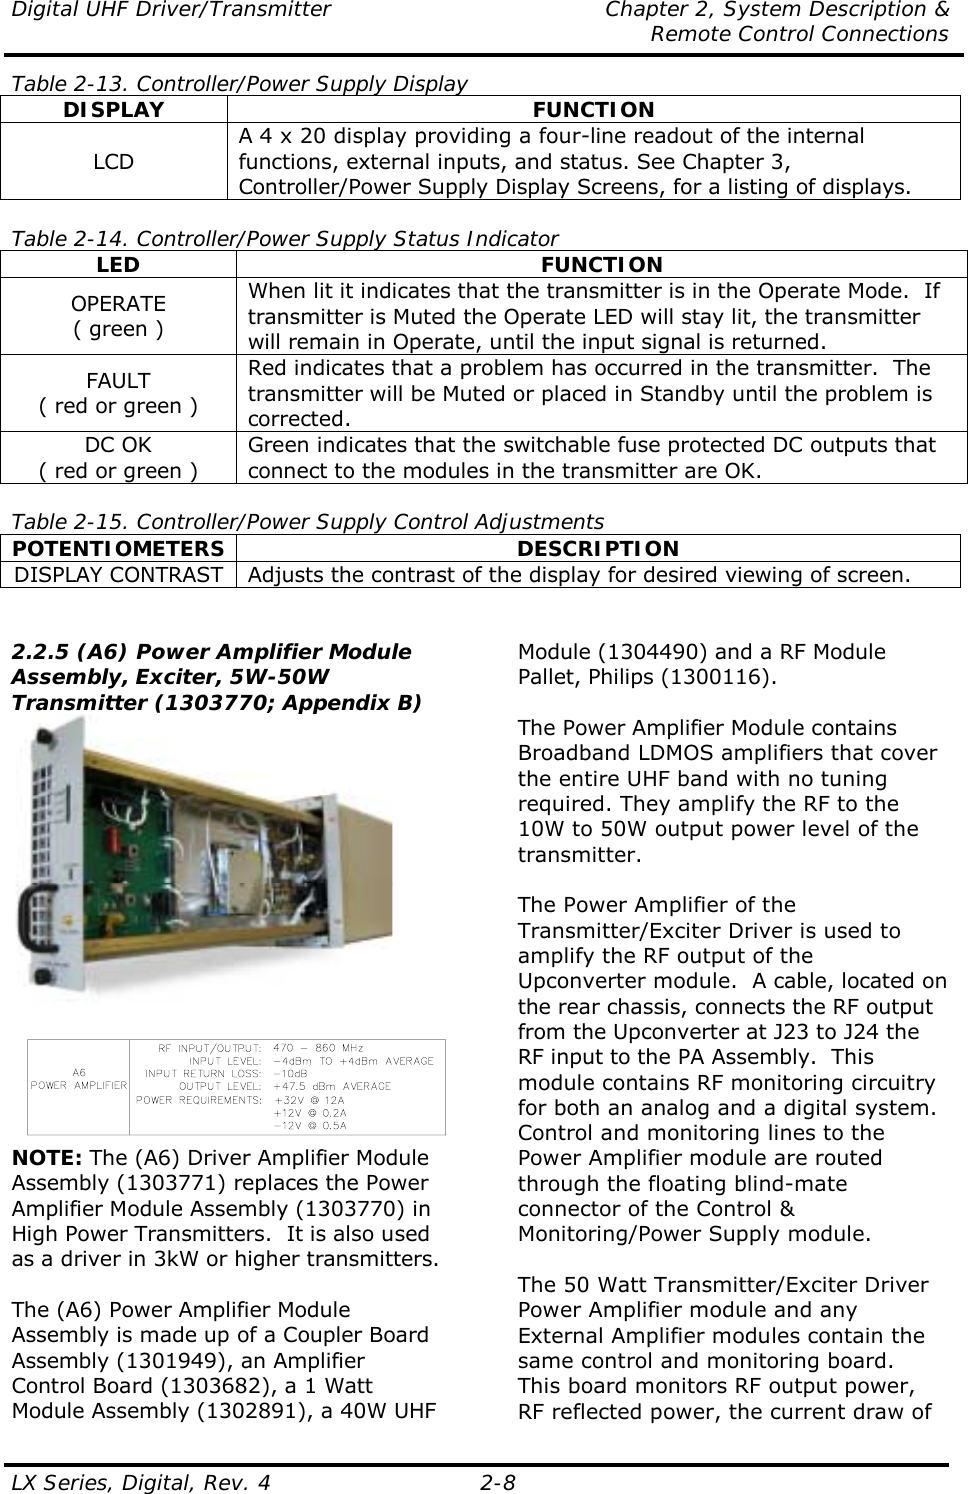 Digital UHF Driver/Transmitter  Chapter 2, System Description &amp;   Remote Control Connections LX Series, Digital, Rev. 4    2-8 Table 2-13. Controller/Power Supply Display DISPLAY FUNCTION LCD A 4 x 20 display providing a four-line readout of the internal functions, external inputs, and status. See Chapter 3, Controller/Power Supply Display Screens, for a listing of displays.  Table 2-14. Controller/Power Supply Status Indicator LED FUNCTION OPERATE ( green ) When lit it indicates that the transmitter is in the Operate Mode.  If transmitter is Muted the Operate LED will stay lit, the transmitter will remain in Operate, until the input signal is returned. FAULT ( red or green ) Red indicates that a problem has occurred in the transmitter.  The transmitter will be Muted or placed in Standby until the problem is corrected. DC OK ( red or green ) Green indicates that the switchable fuse protected DC outputs that connect to the modules in the transmitter are OK.  Table 2-15. Controller/Power Supply Control Adjustments POTENTIOMETERS DESCRIPTION DISPLAY CONTRAST  Adjusts the contrast of the display for desired viewing of screen.  2.2.5 (A6) Power Amplifier Module Assembly, Exciter, 5W-50W Transmitter (1303770; Appendix B)    NOTE: The (A6) Driver Amplifier Module Assembly (1303771) replaces the Power Amplifier Module Assembly (1303770) in High Power Transmitters.  It is also used as a driver in 3kW or higher transmitters.  The (A6) Power Amplifier Module Assembly is made up of a Coupler Board Assembly (1301949), an Amplifier Control Board (1303682), a 1 Watt Module Assembly (1302891), a 40W UHF Module (1304490) and a RF Module Pallet, Philips (1300116).  The Power Amplifier Module contains Broadband LDMOS amplifiers that cover the entire UHF band with no tuning required. They amplify the RF to the 10W to 50W output power level of the transmitter.  The Power Amplifier of the Transmitter/Exciter Driver is used to amplify the RF output of the Upconverter module.  A cable, located on the rear chassis, connects the RF output from the Upconverter at J23 to J24 the RF input to the PA Assembly.  This module contains RF monitoring circuitry for both an analog and a digital system.  Control and monitoring lines to the Power Amplifier module are routed through the floating blind-mate connector of the Control &amp; Monitoring/Power Supply module.  The 50 Watt Transmitter/Exciter Driver Power Amplifier module and any External Amplifier modules contain the same control and monitoring board.  This board monitors RF output power, RF reflected power, the current draw of 